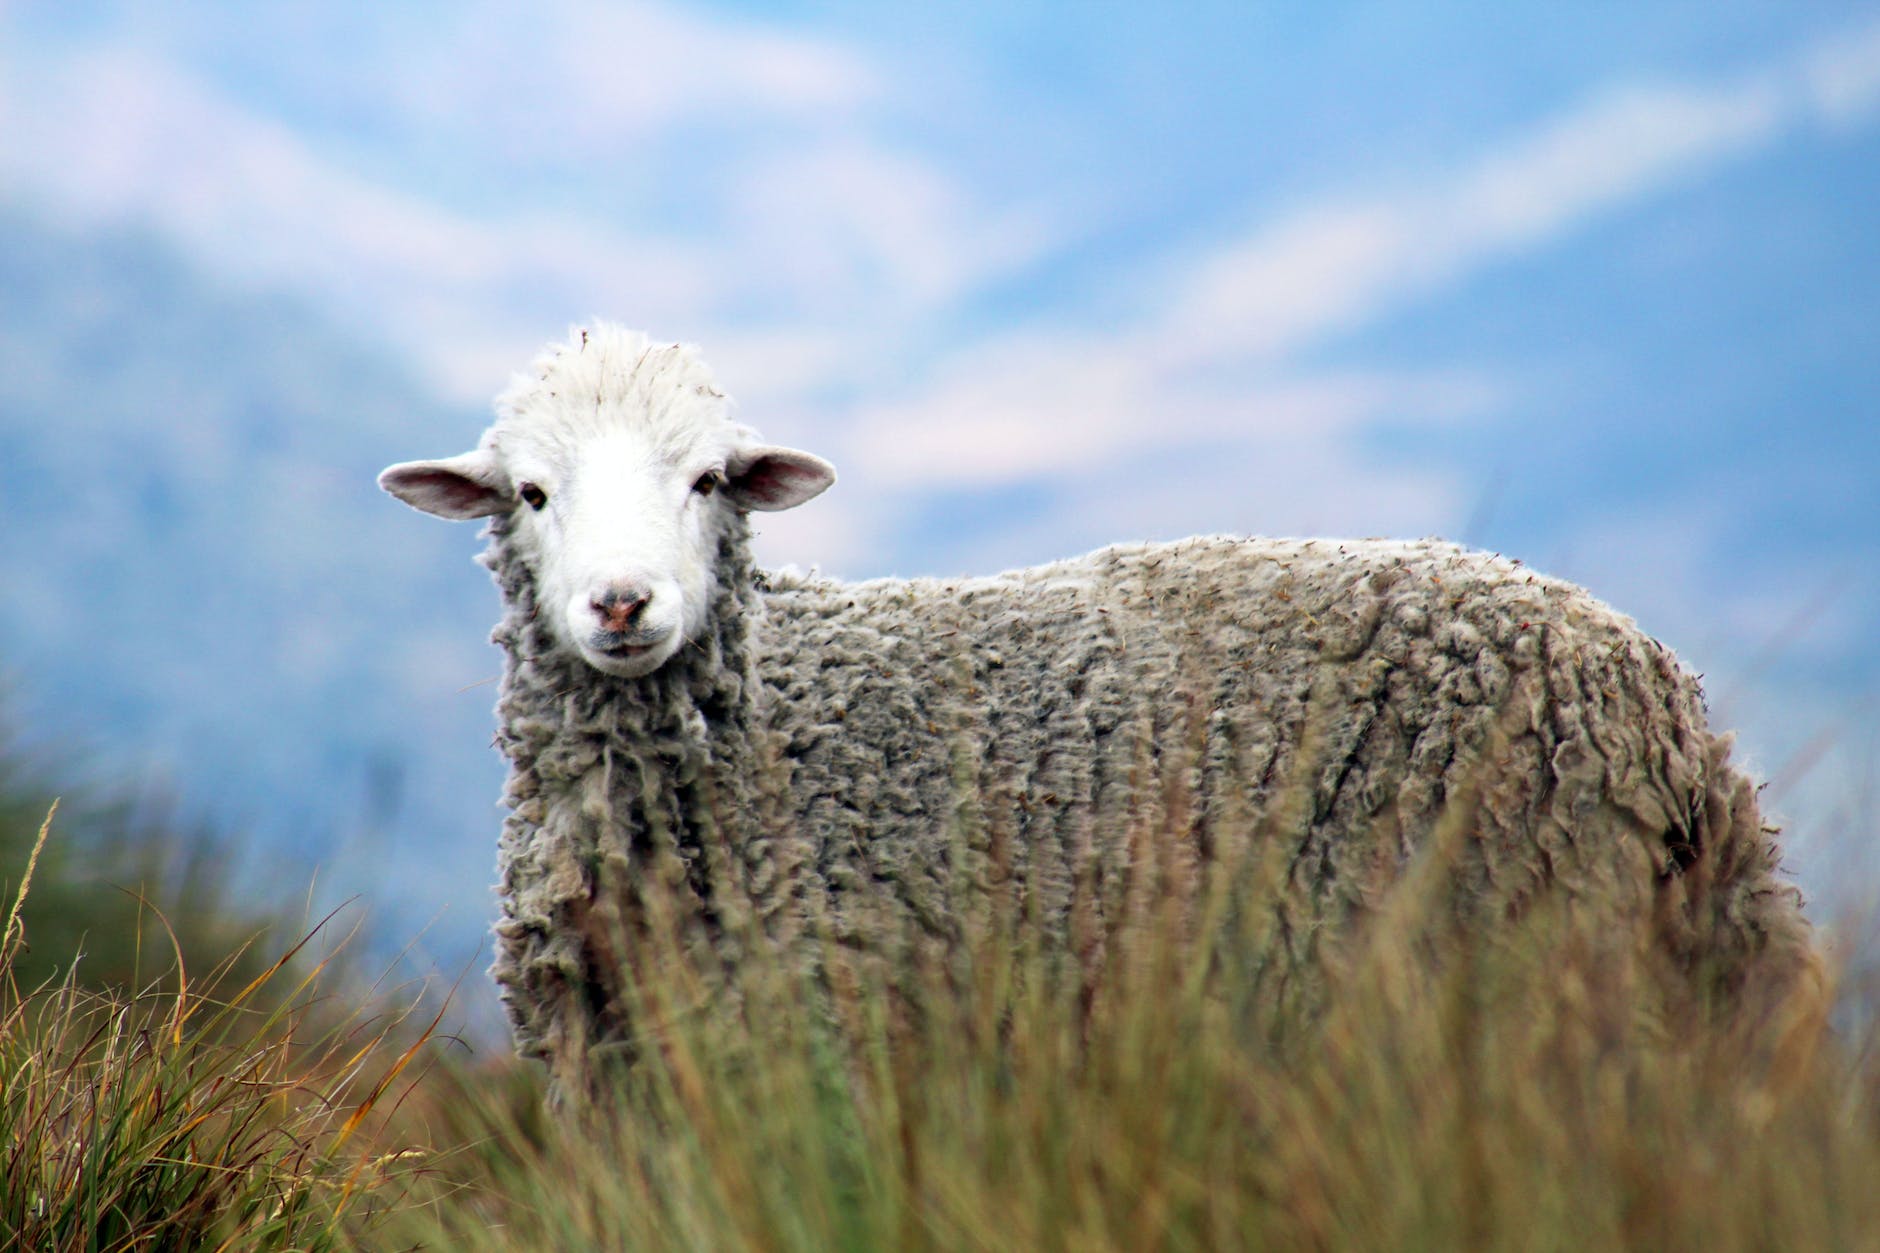 brown sheep on grass in auto focus photography